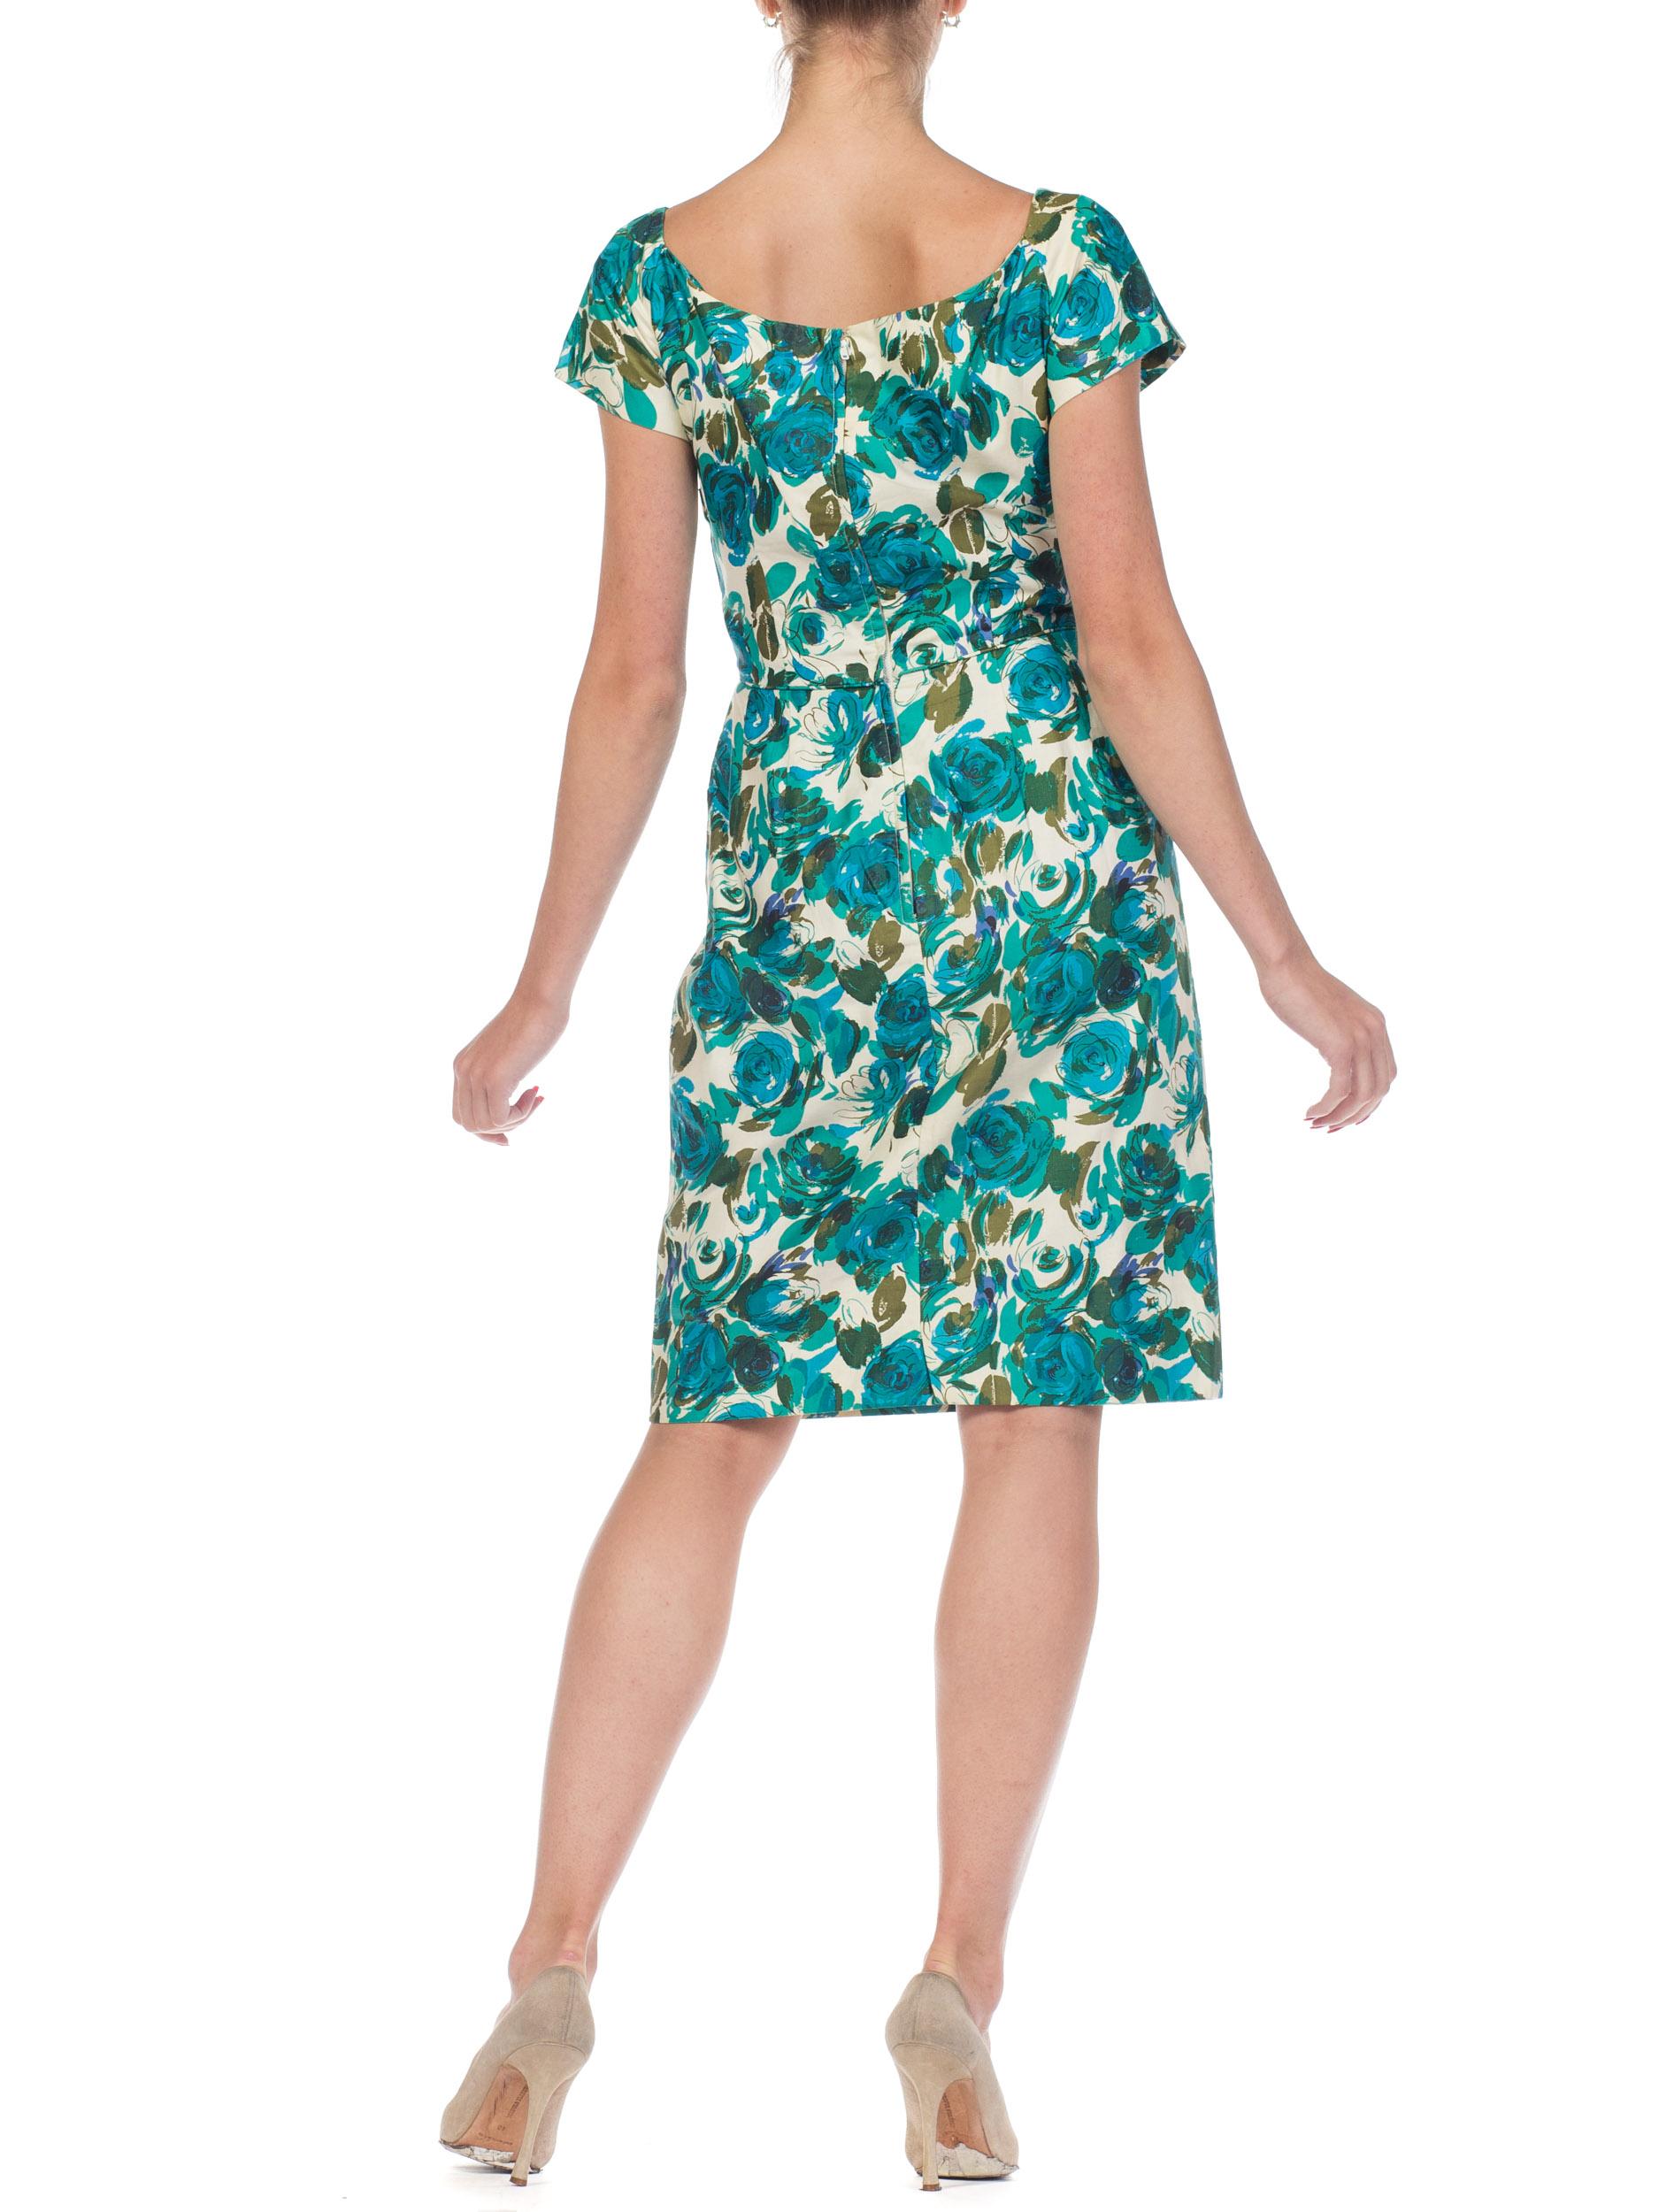 1950S Teal Floral Print Cotton Draped Bodice Dress With Cap Sleeves For Sale 6